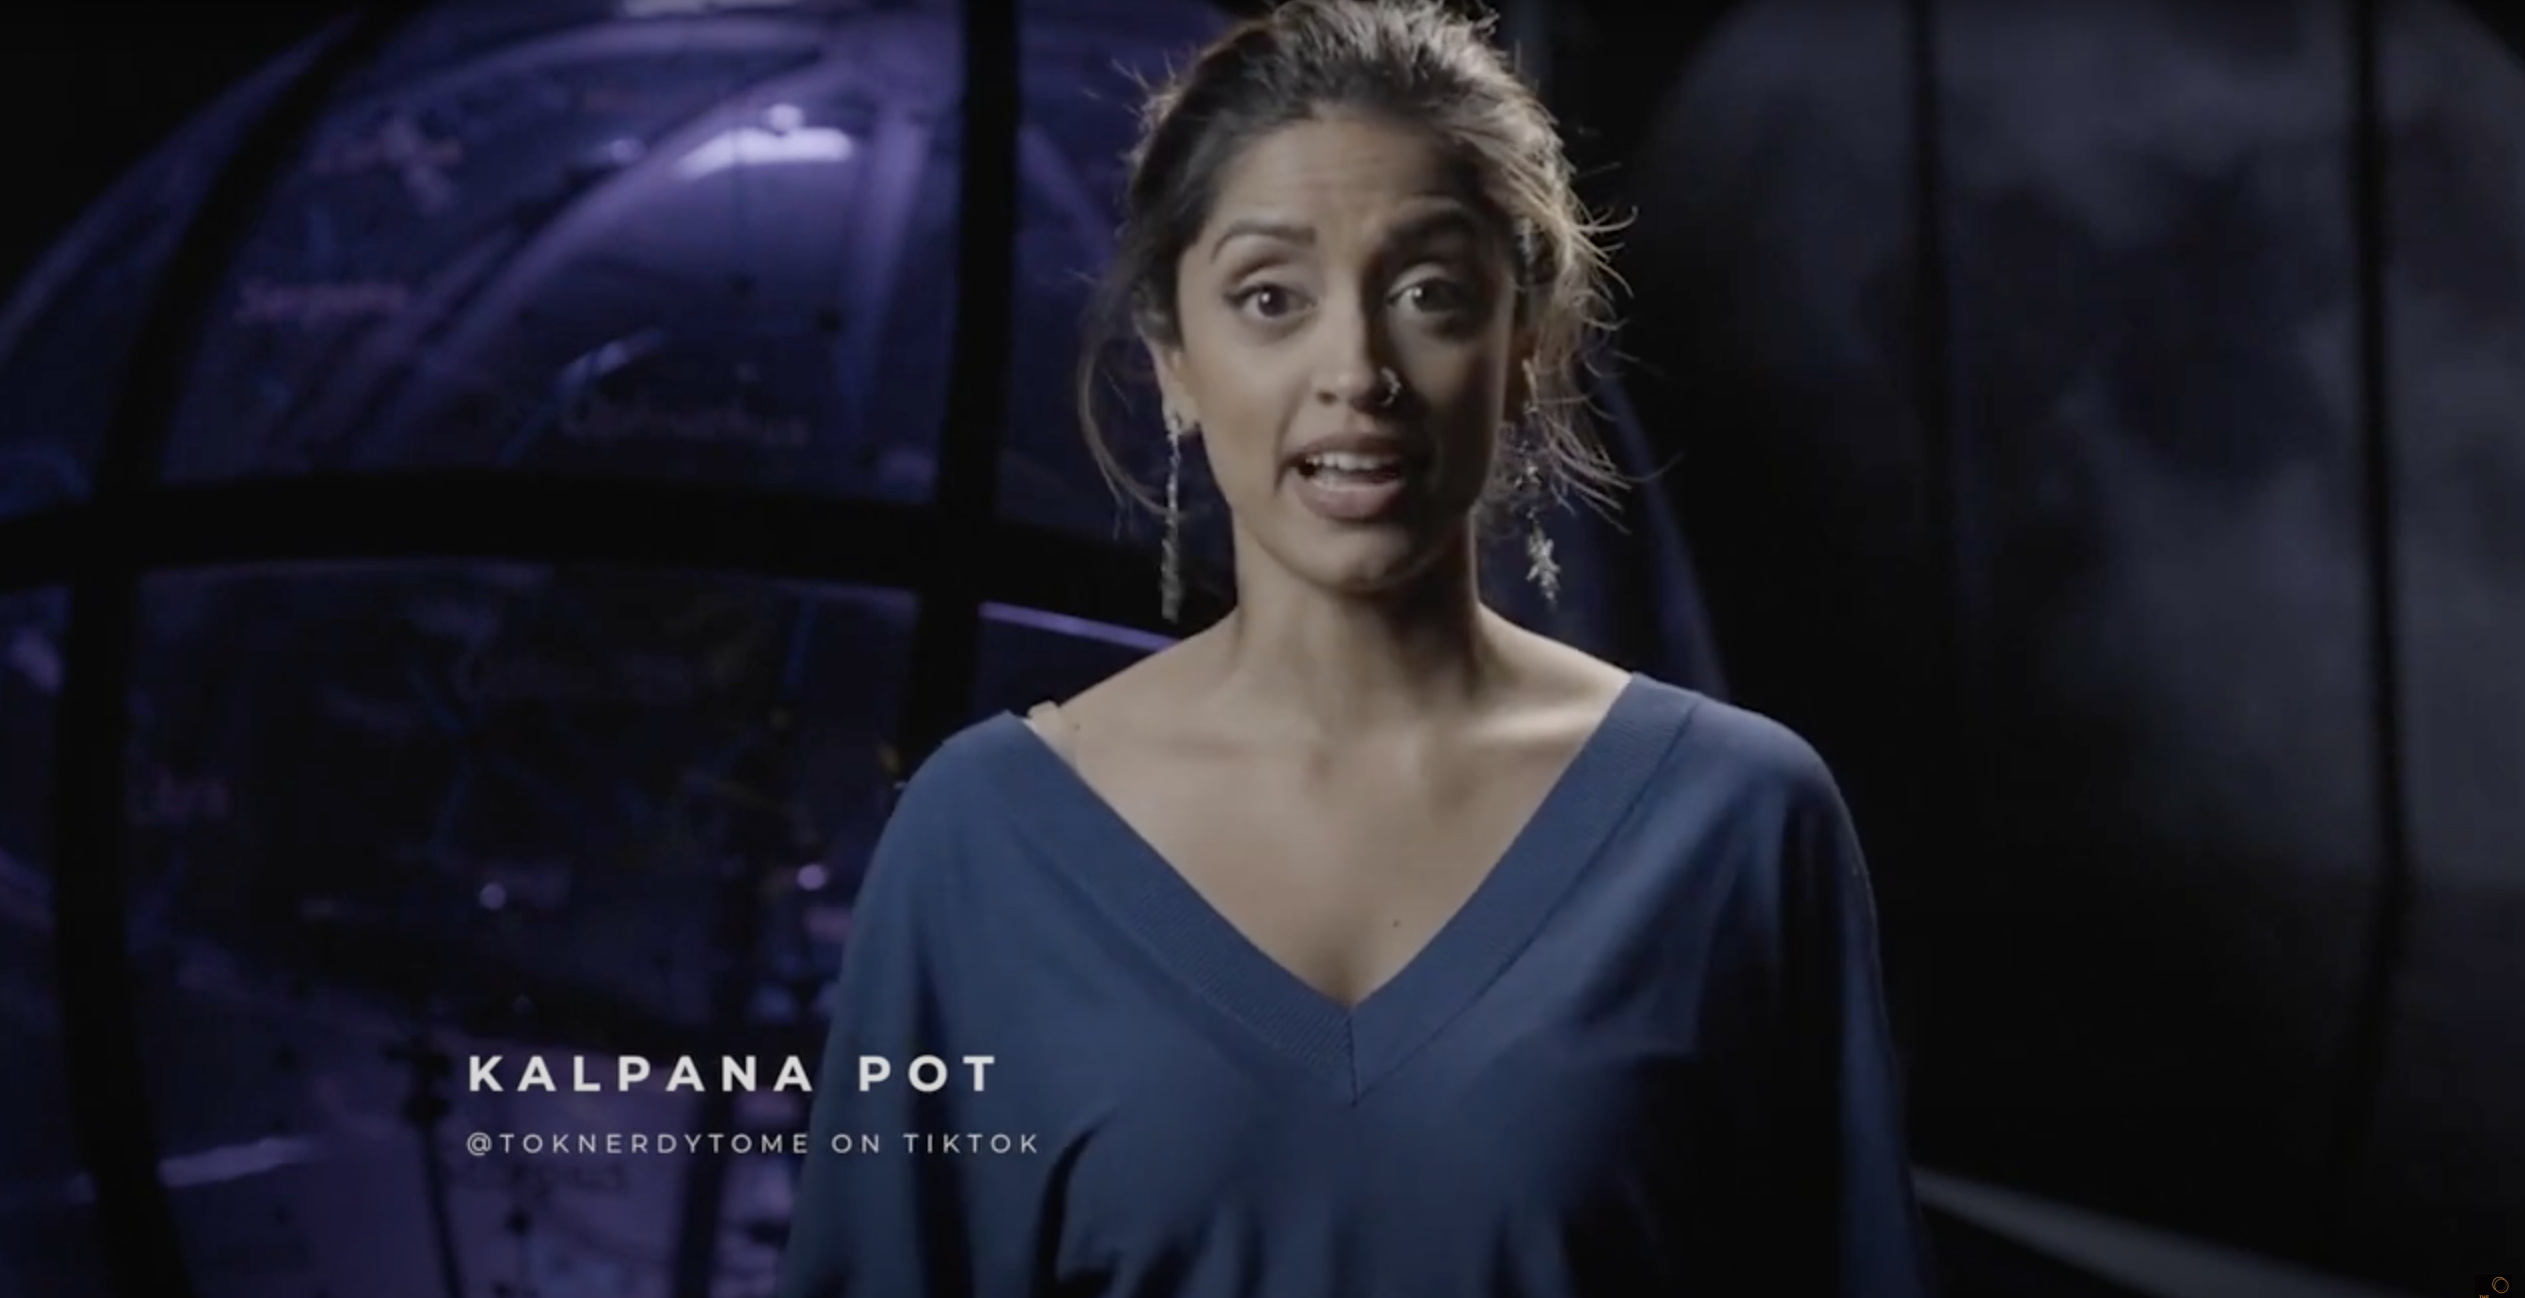 Kalpana Pot, co-host of A PRACTICAL GUIDE TO THE COSMOS, explains how to find a killer stargazing spot!